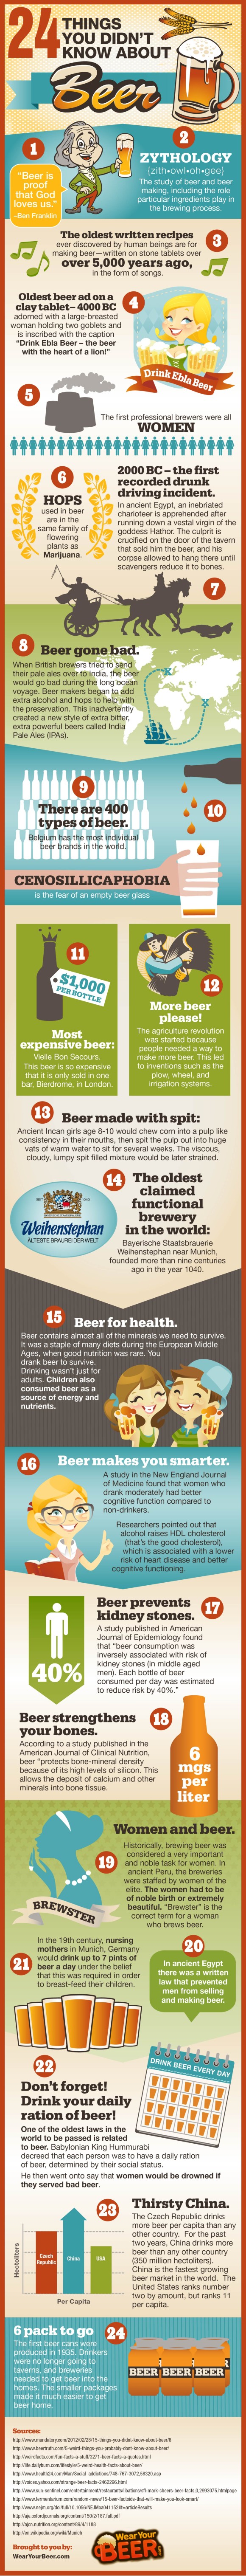 24-things-you-didnt-know-about-beer